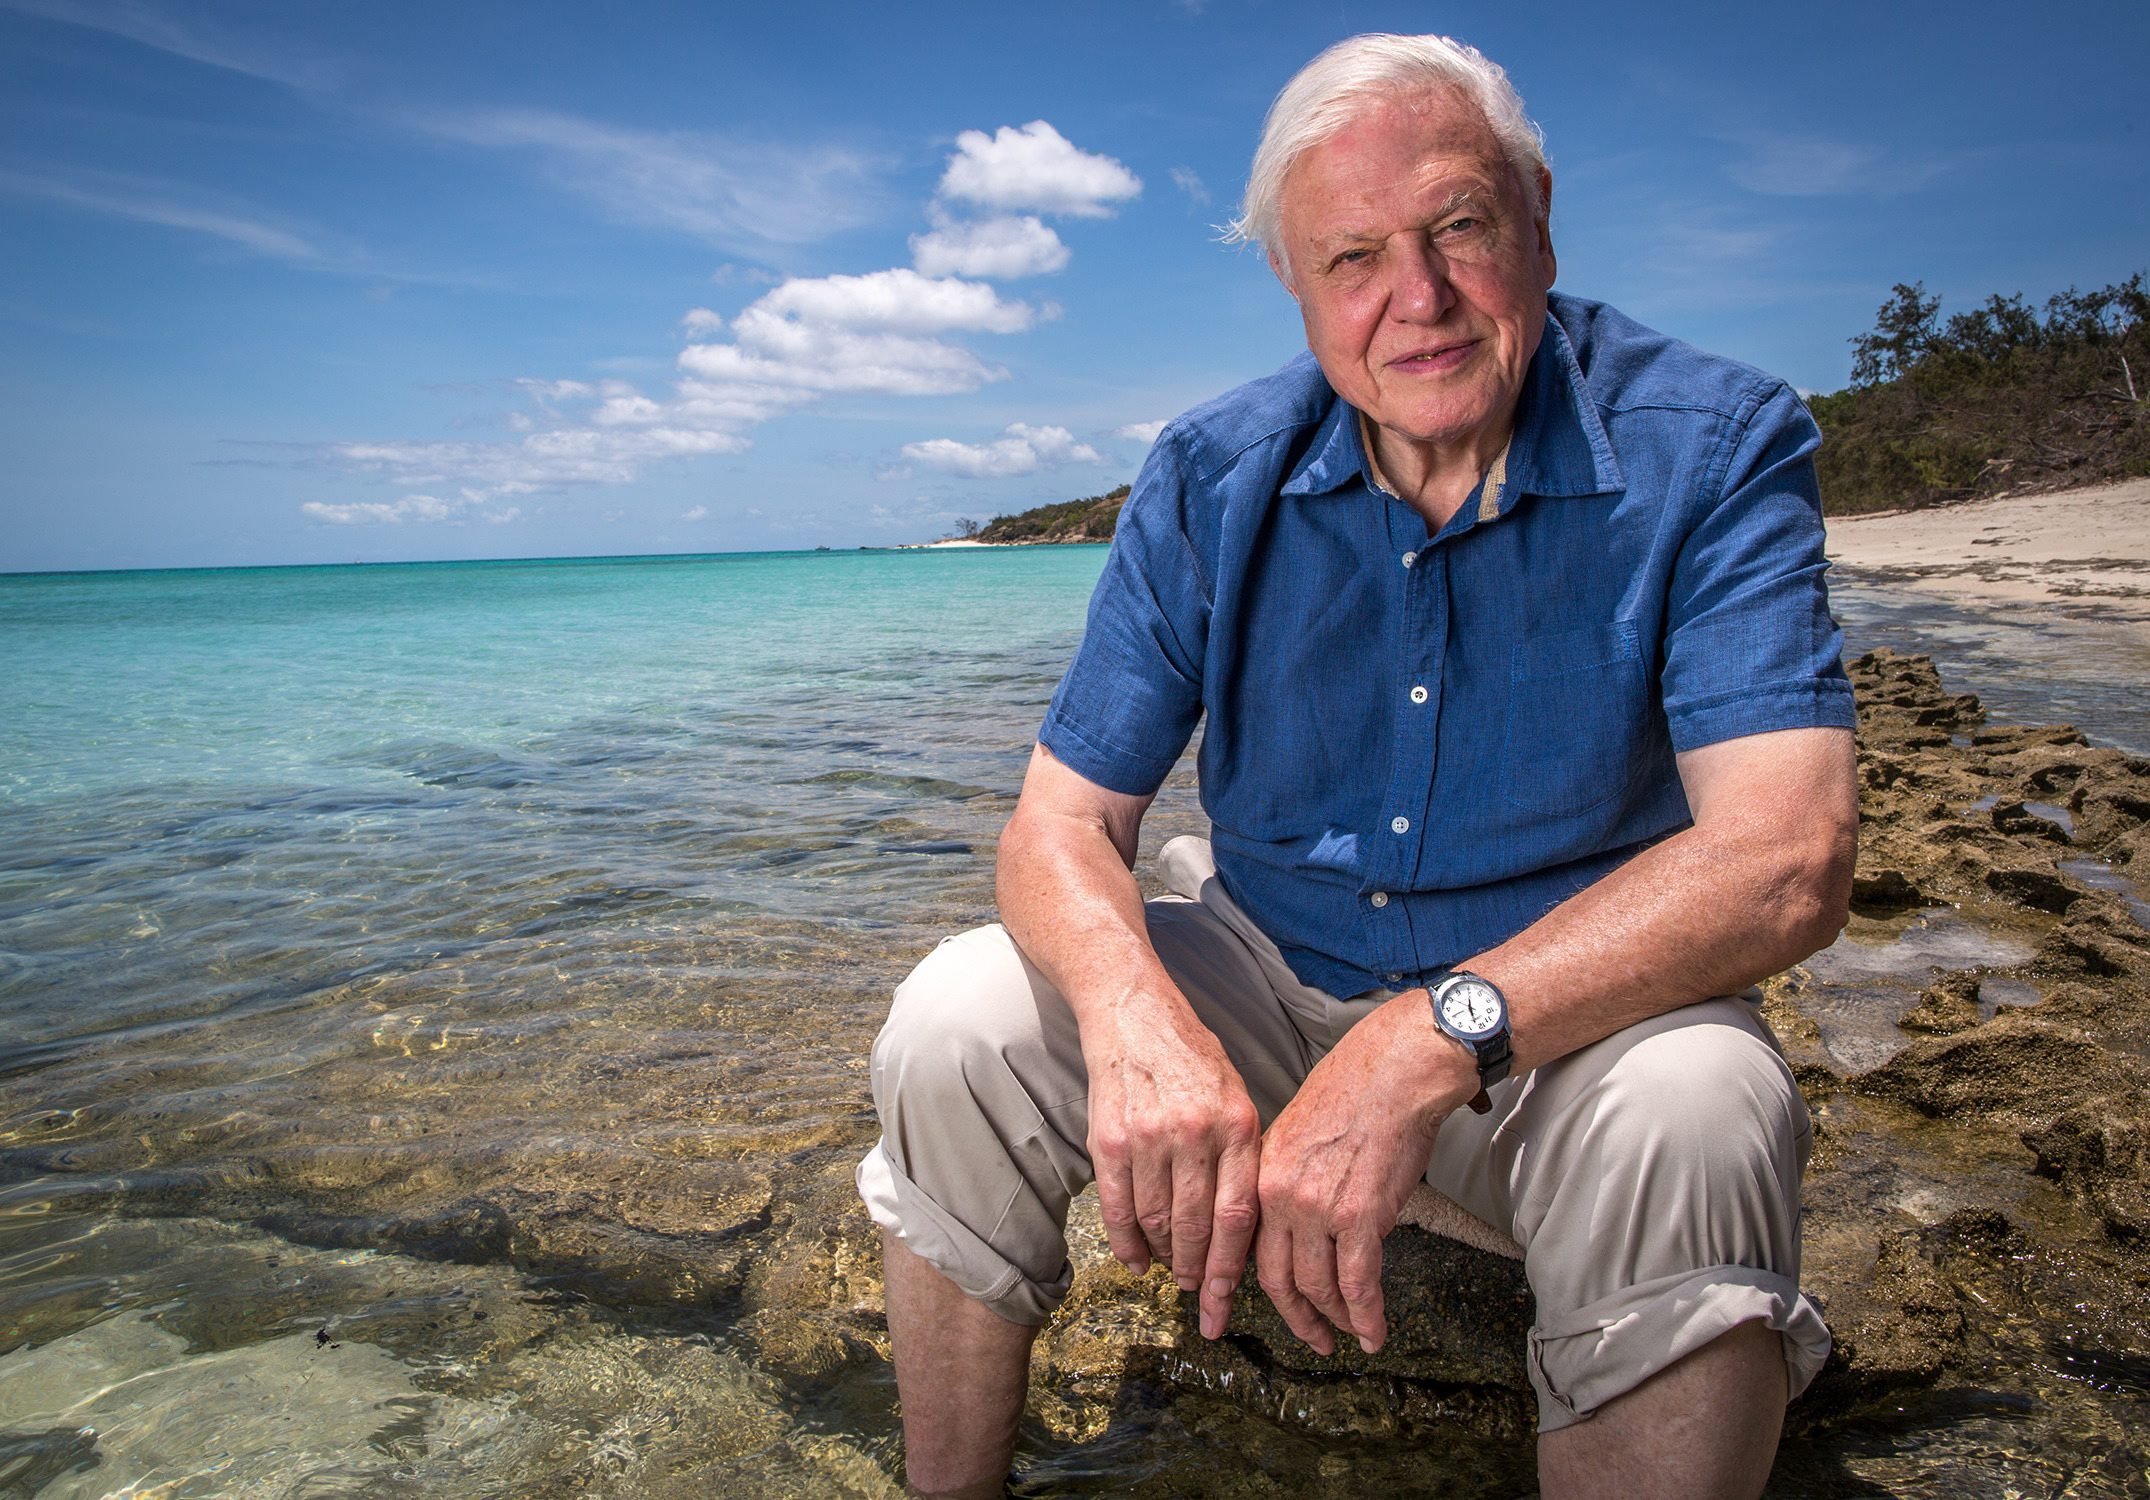 David Attenborough on the Great Barrier Reef for his upcoming three-part series on the Australian natural wonder. Photo: EPA